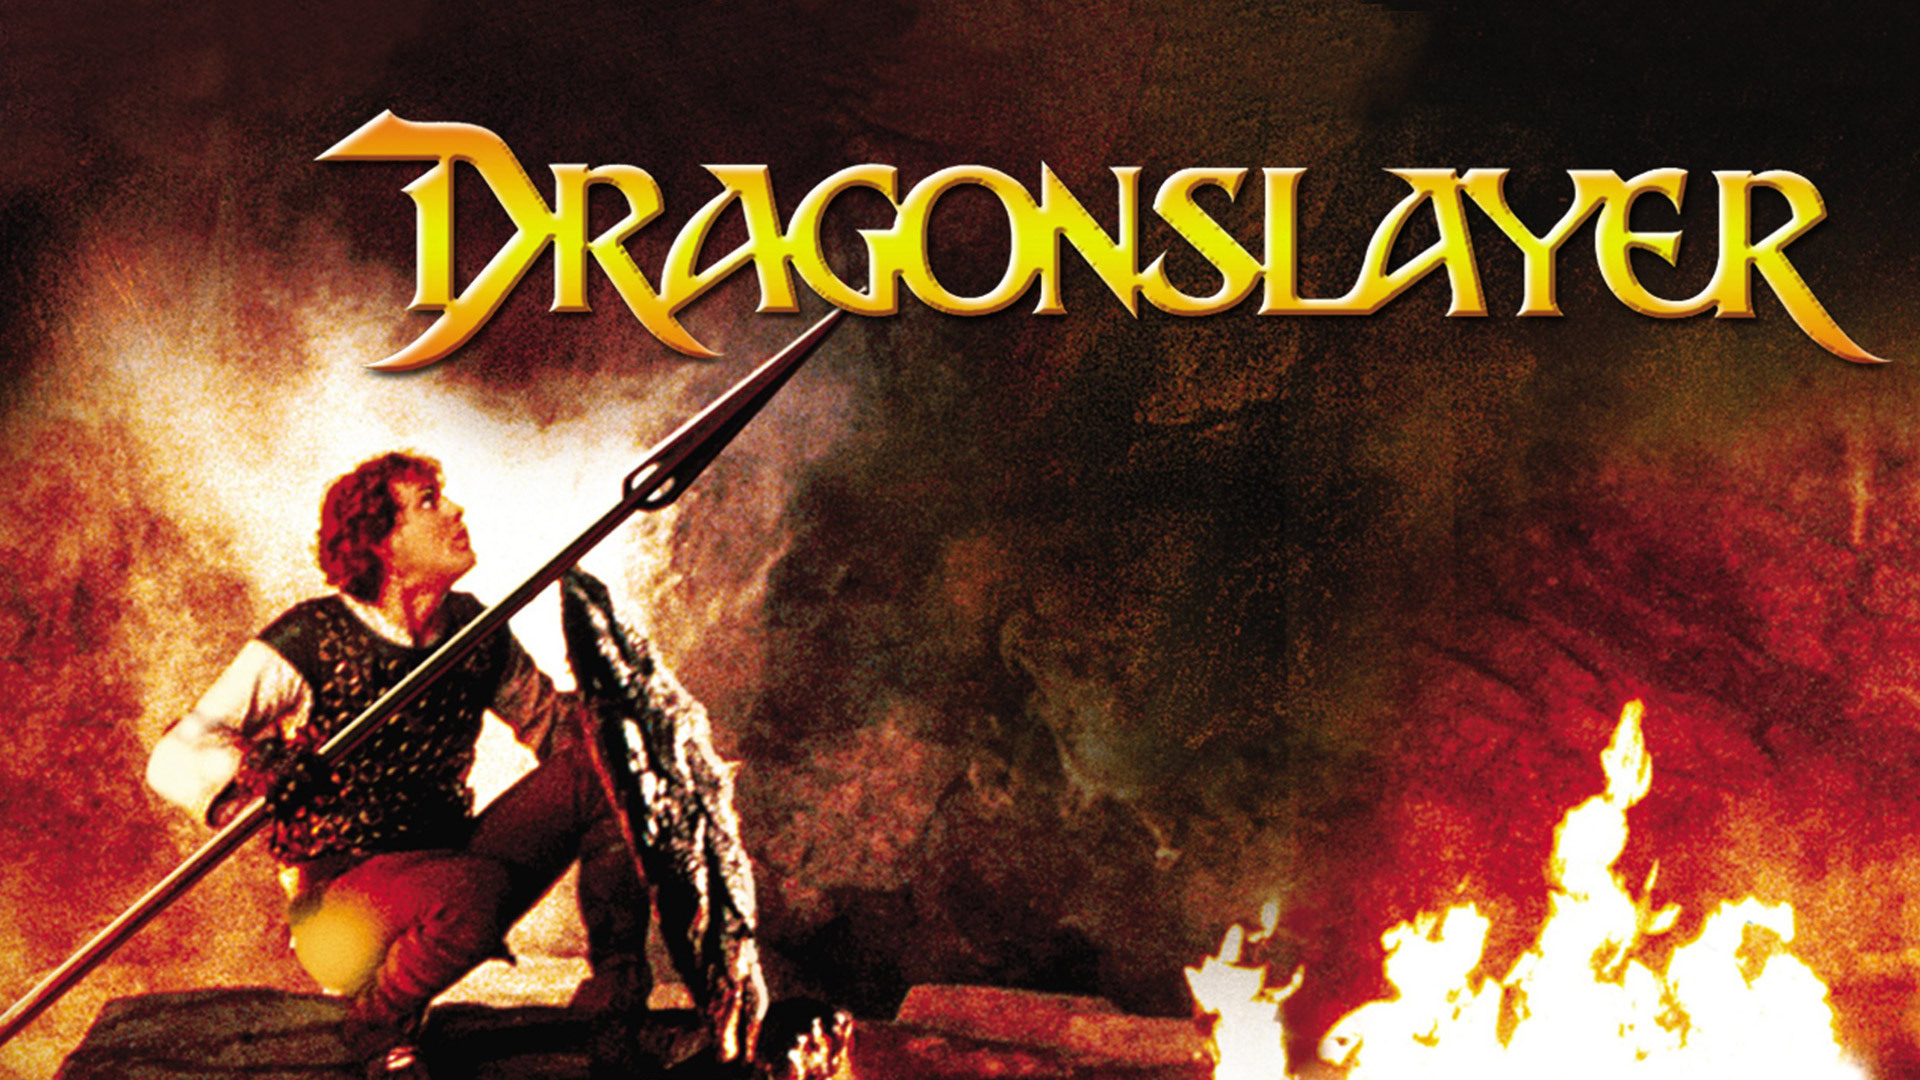 Dragonslayer (1981) - The fight of Galen against the dragon 